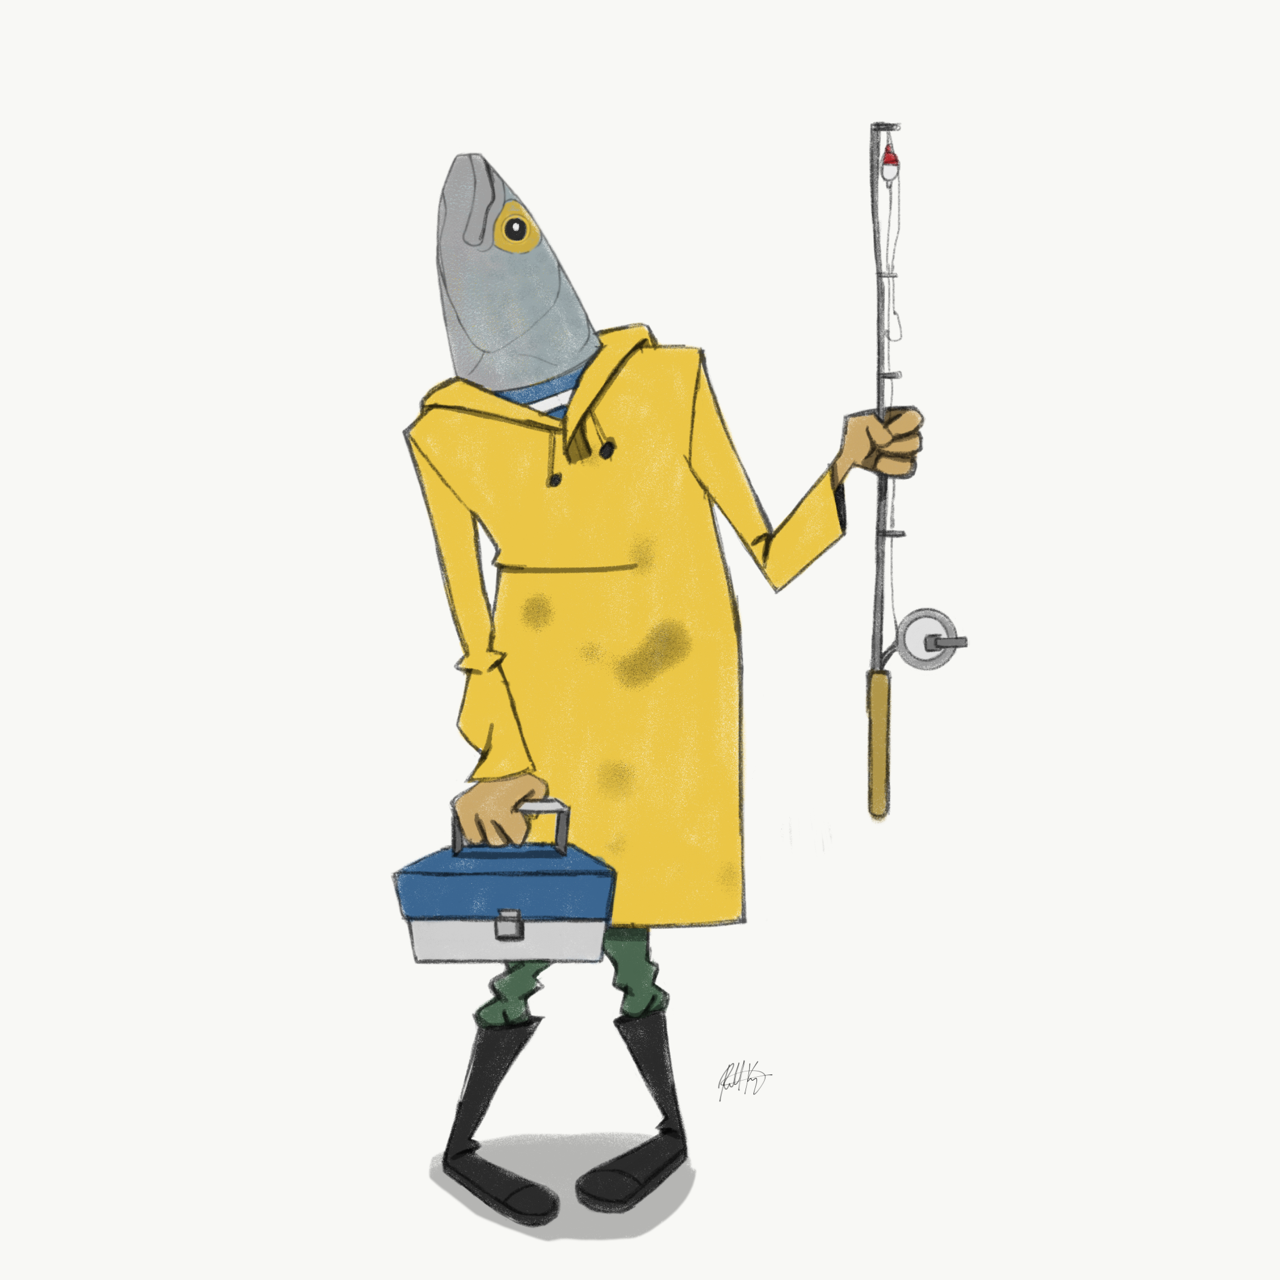 Fishermen🎣 Instagram/Tumblr: richkenneyart — Immediately post your art to a topic and get feedback. Join our new community, EatSleepDraw Studio, today!